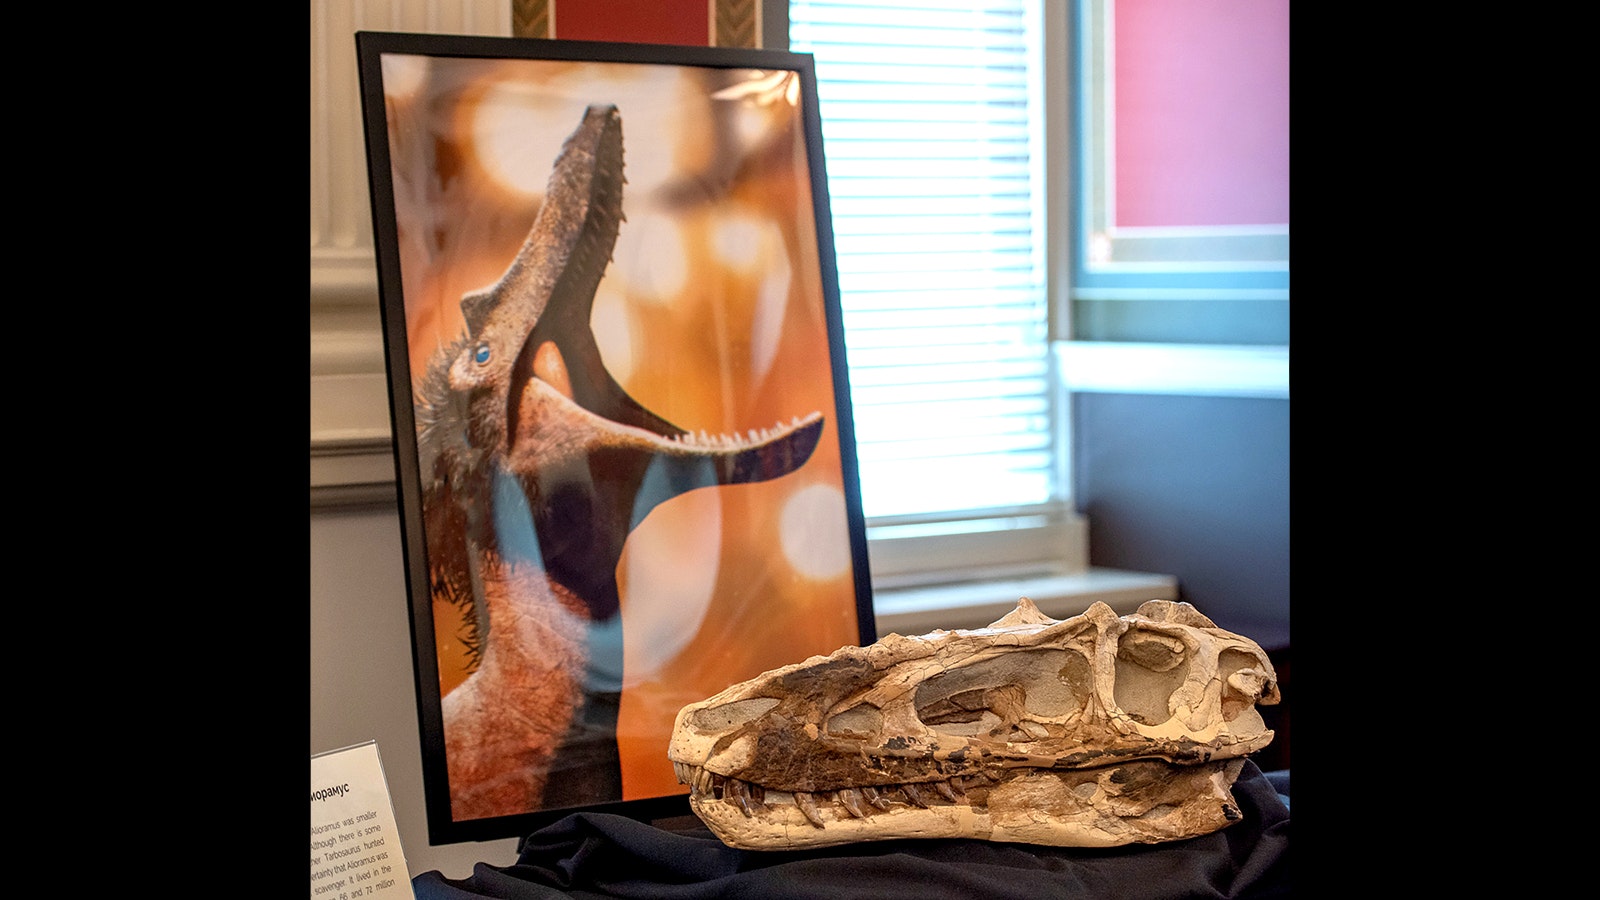 The skull of the Tyrannosaurus relative, Alioramus. Now that this skull, “one of the best-preserved fossils ever found” of this rare dinosaur, will now be available for paleontologists to study as they learn more about the tyrannosaur family tree.